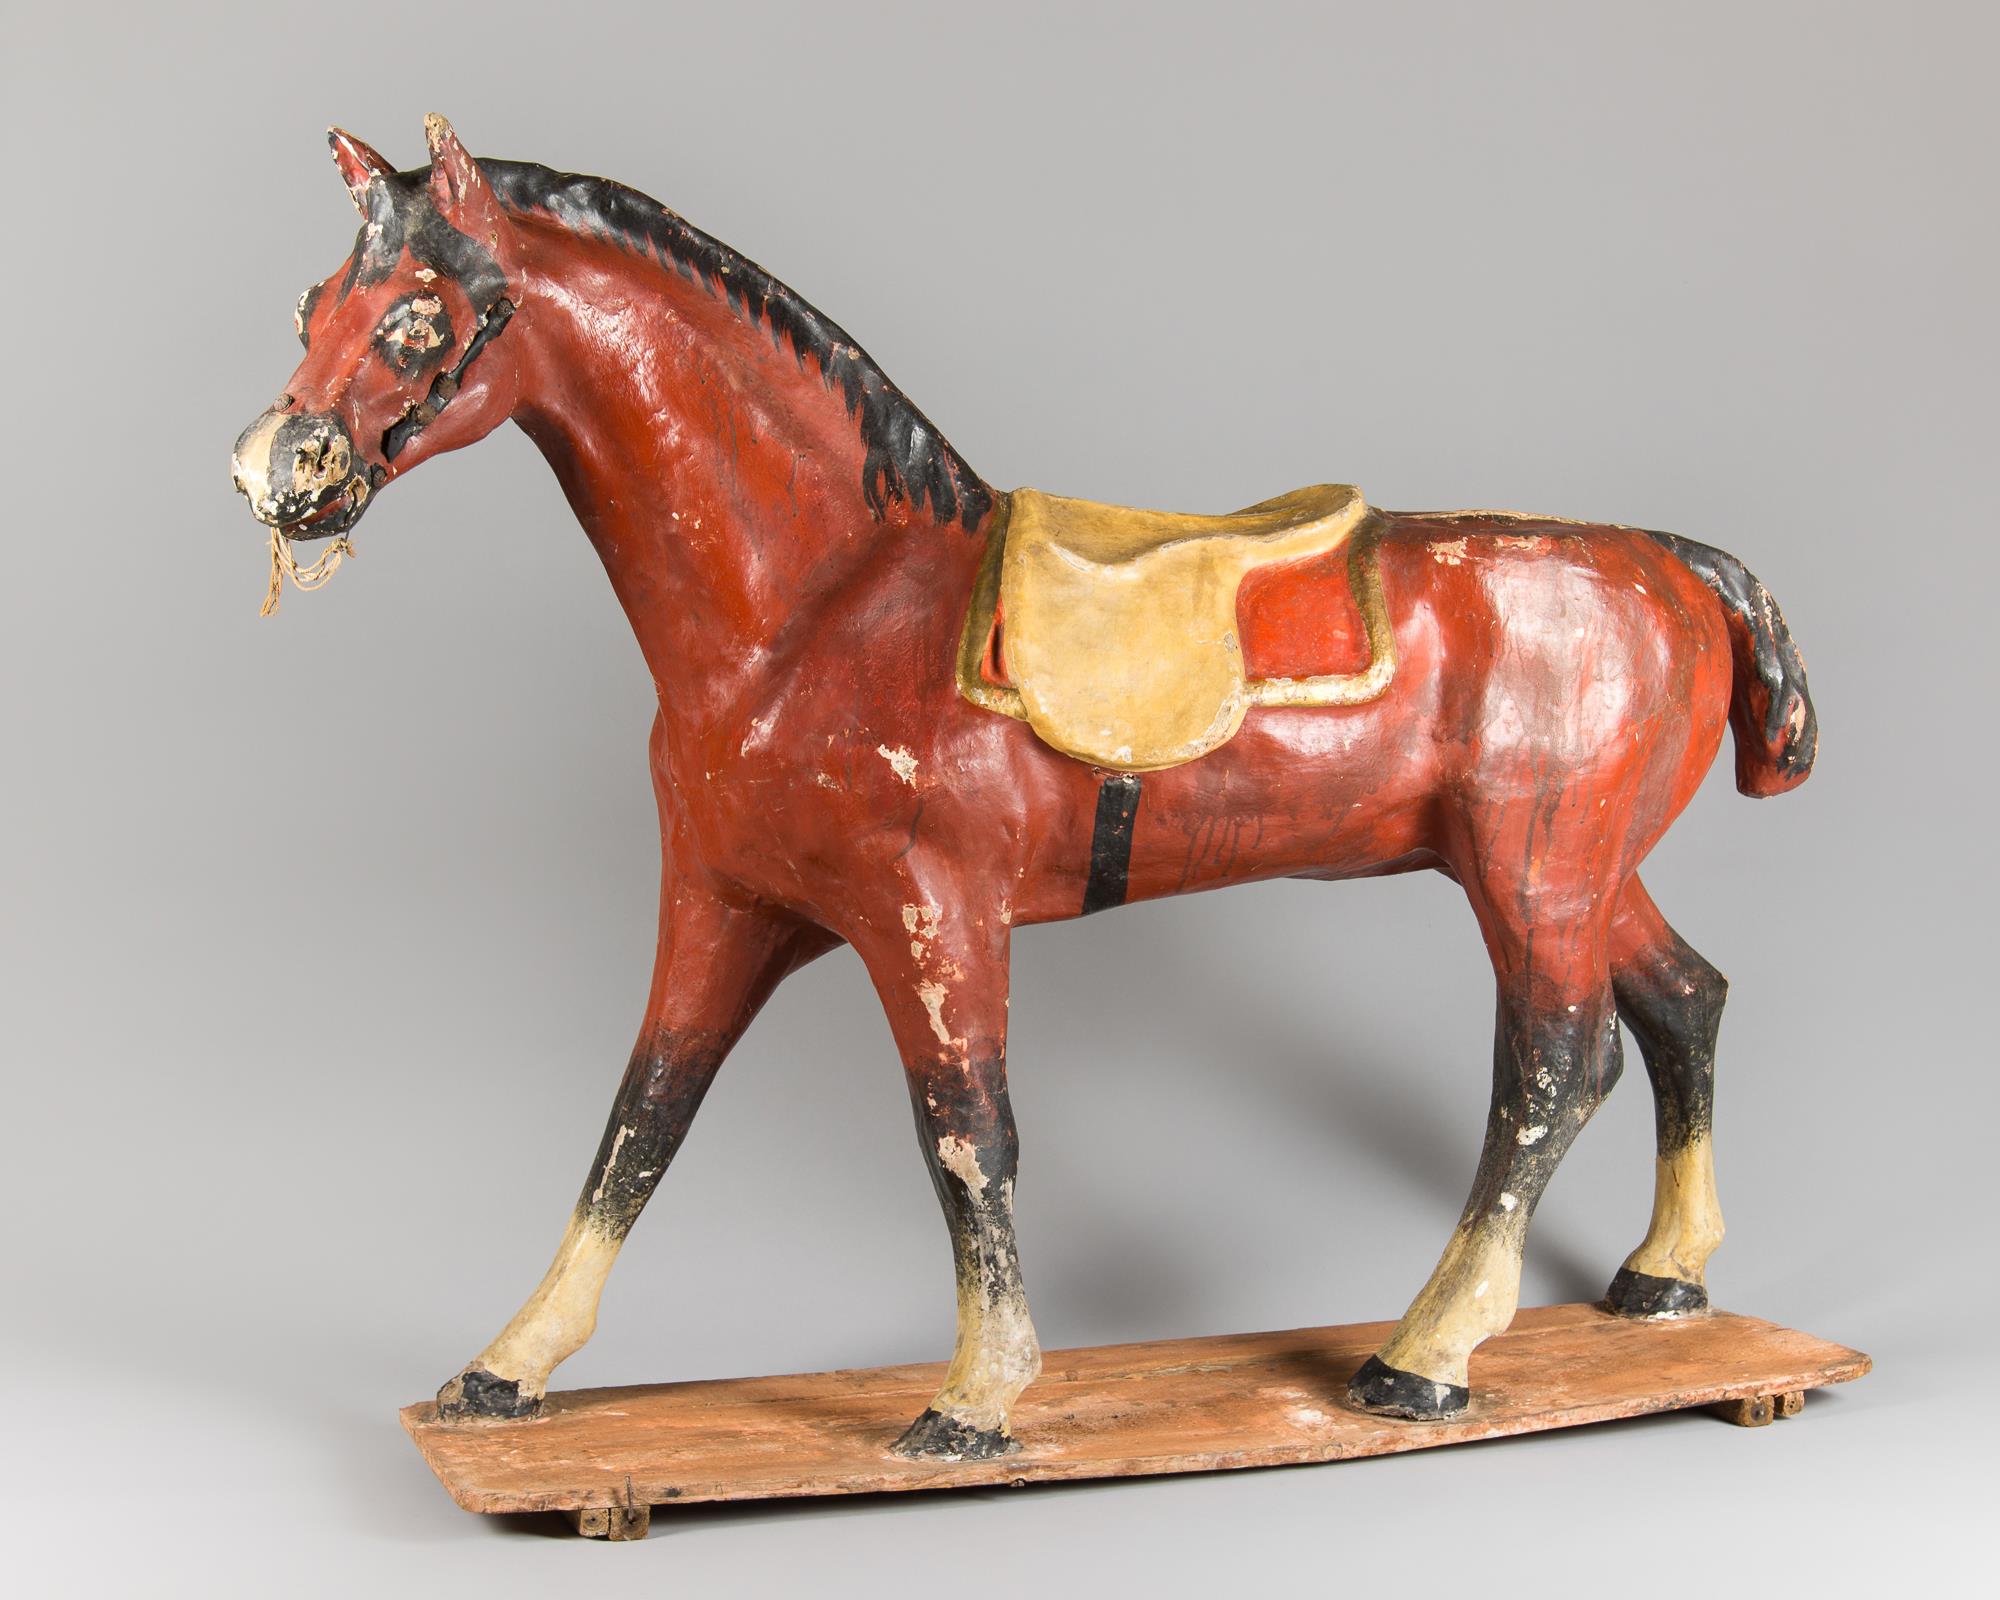 A LARGE LATE 19TH/EARLY 20TH CENTURY FRENCH PAPIER MACHE HORSE. A larger than the normal example